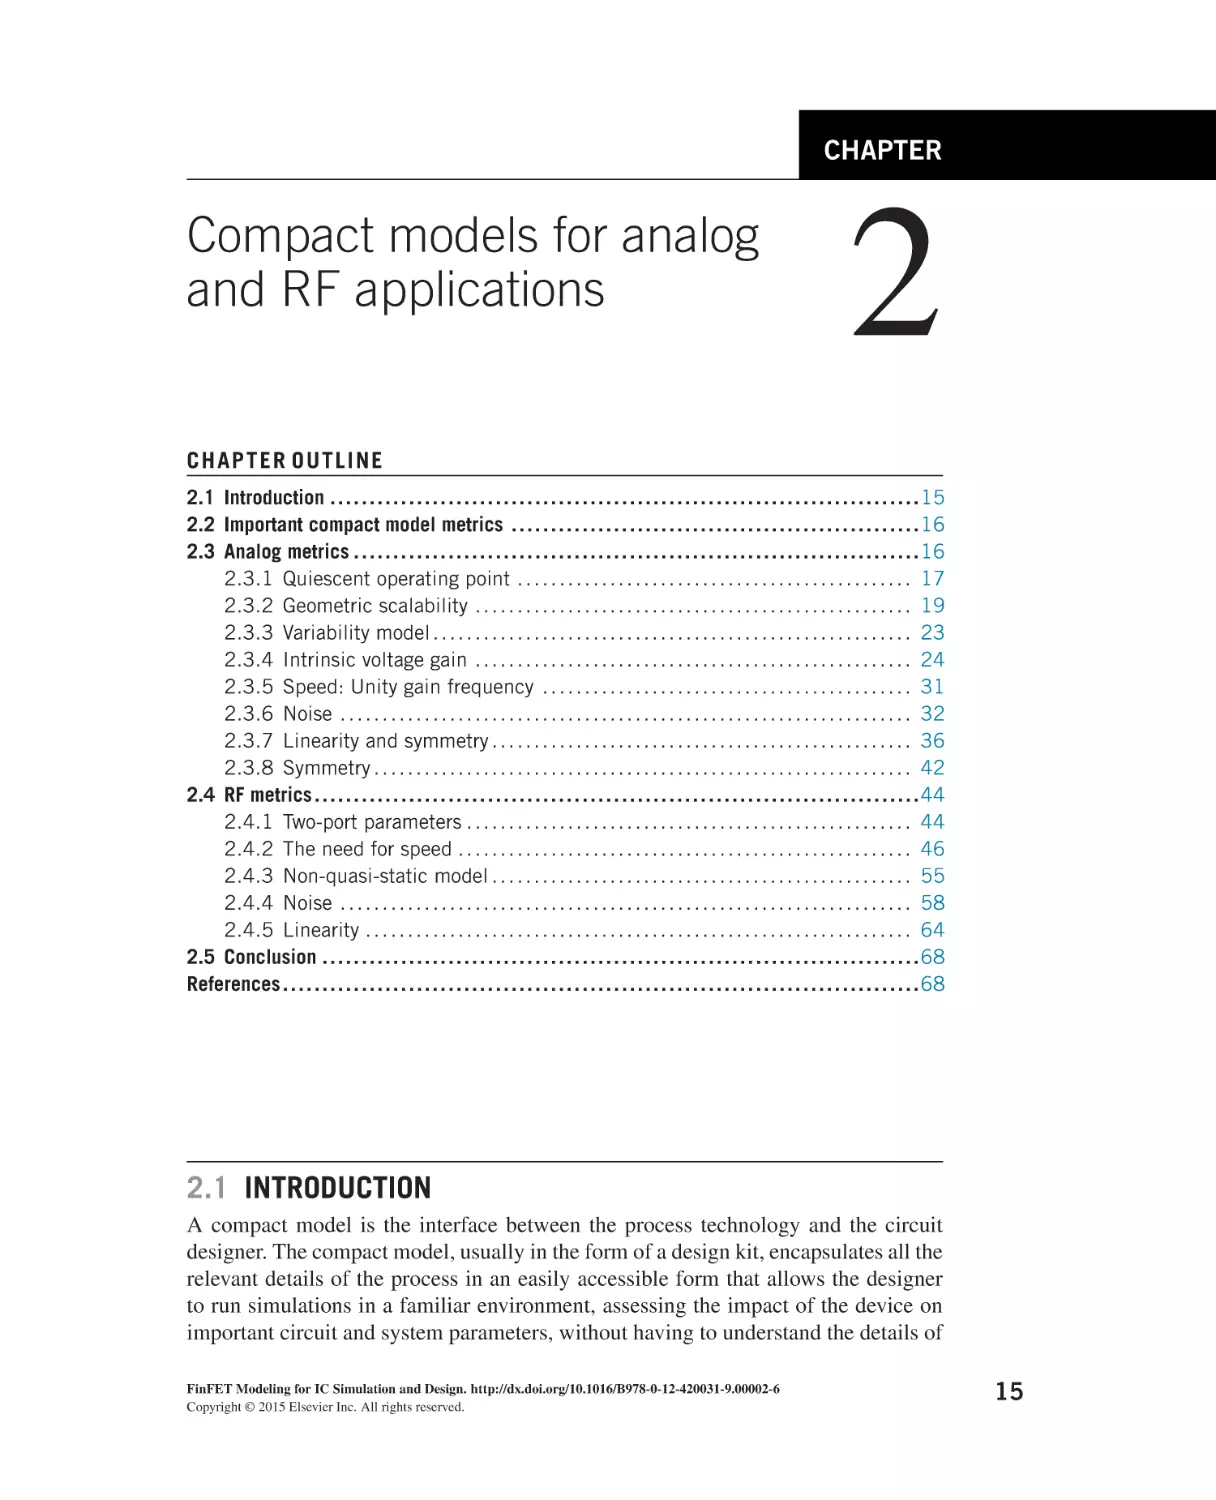 Compact models for analog and RF applications